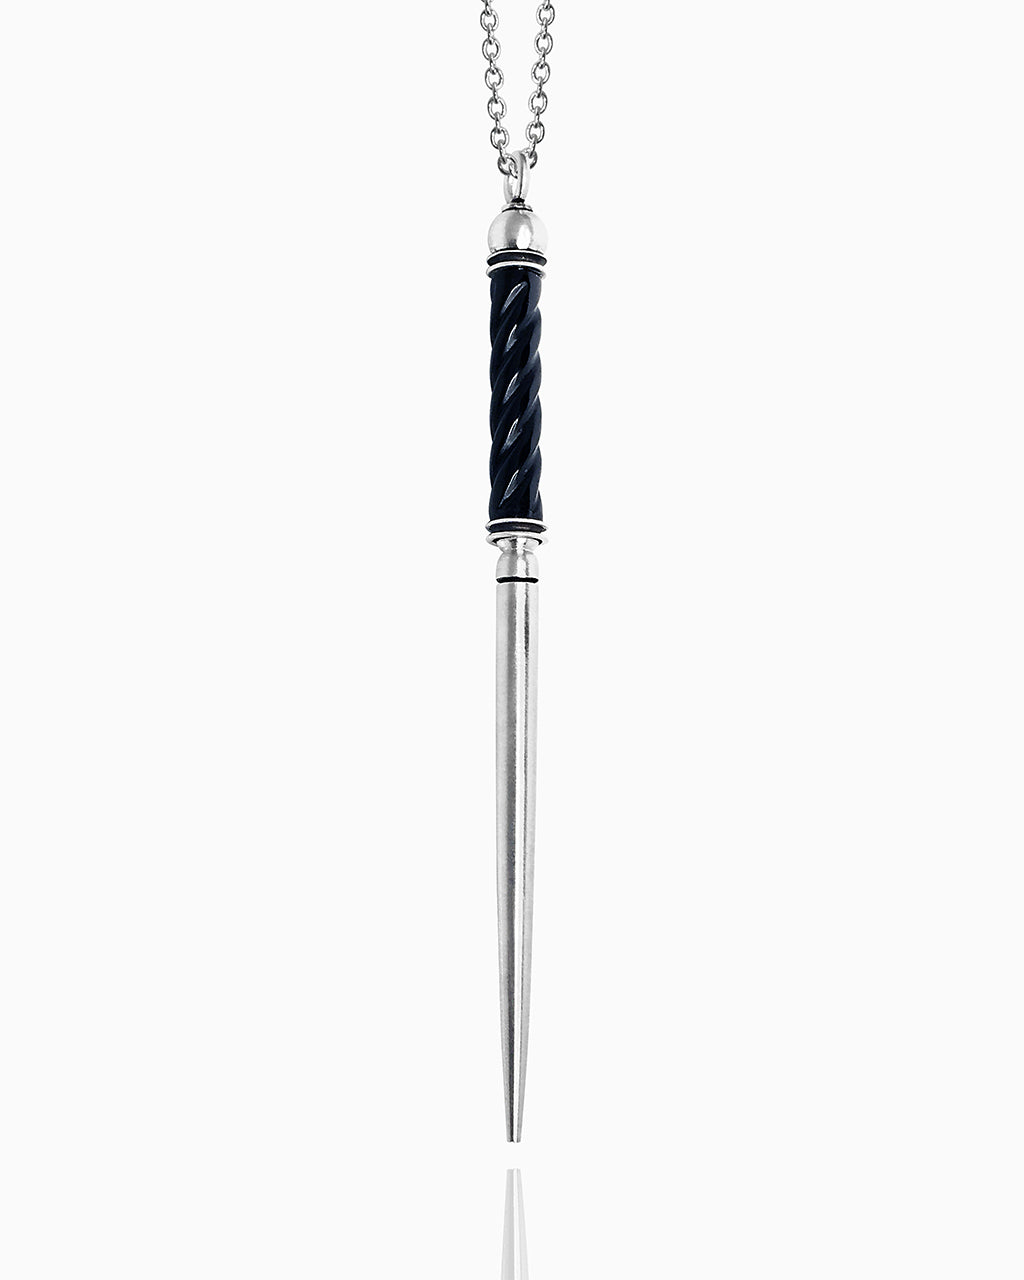 A sterling silver wand necklace hanging against a white background. The handle of the wand is made from a polished piece of black onyx with a spiraled line carved down the onyx bead, giving it a fluted appearance. A sterling silver ball sits on top, and the bottom of the wand is a smooth, tapered circle shape.